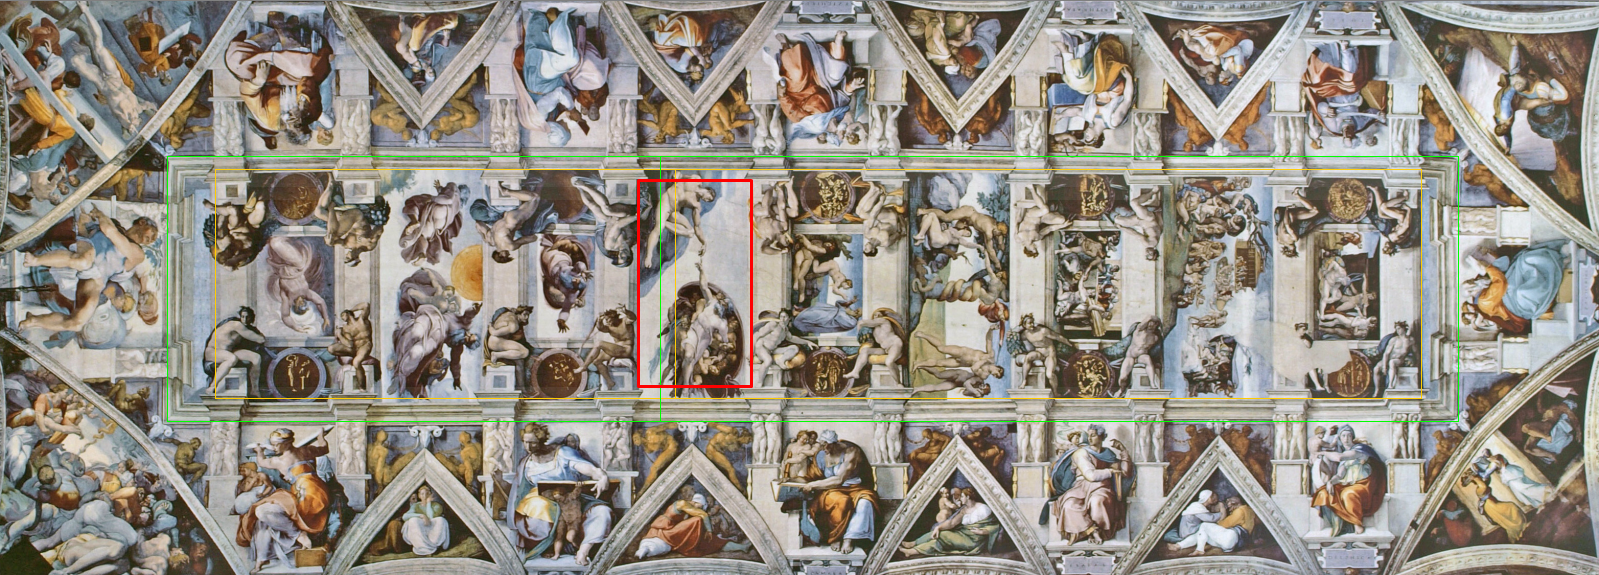 Review Of 2015 Discovery Of Golden Ratios In Sistine Chapel